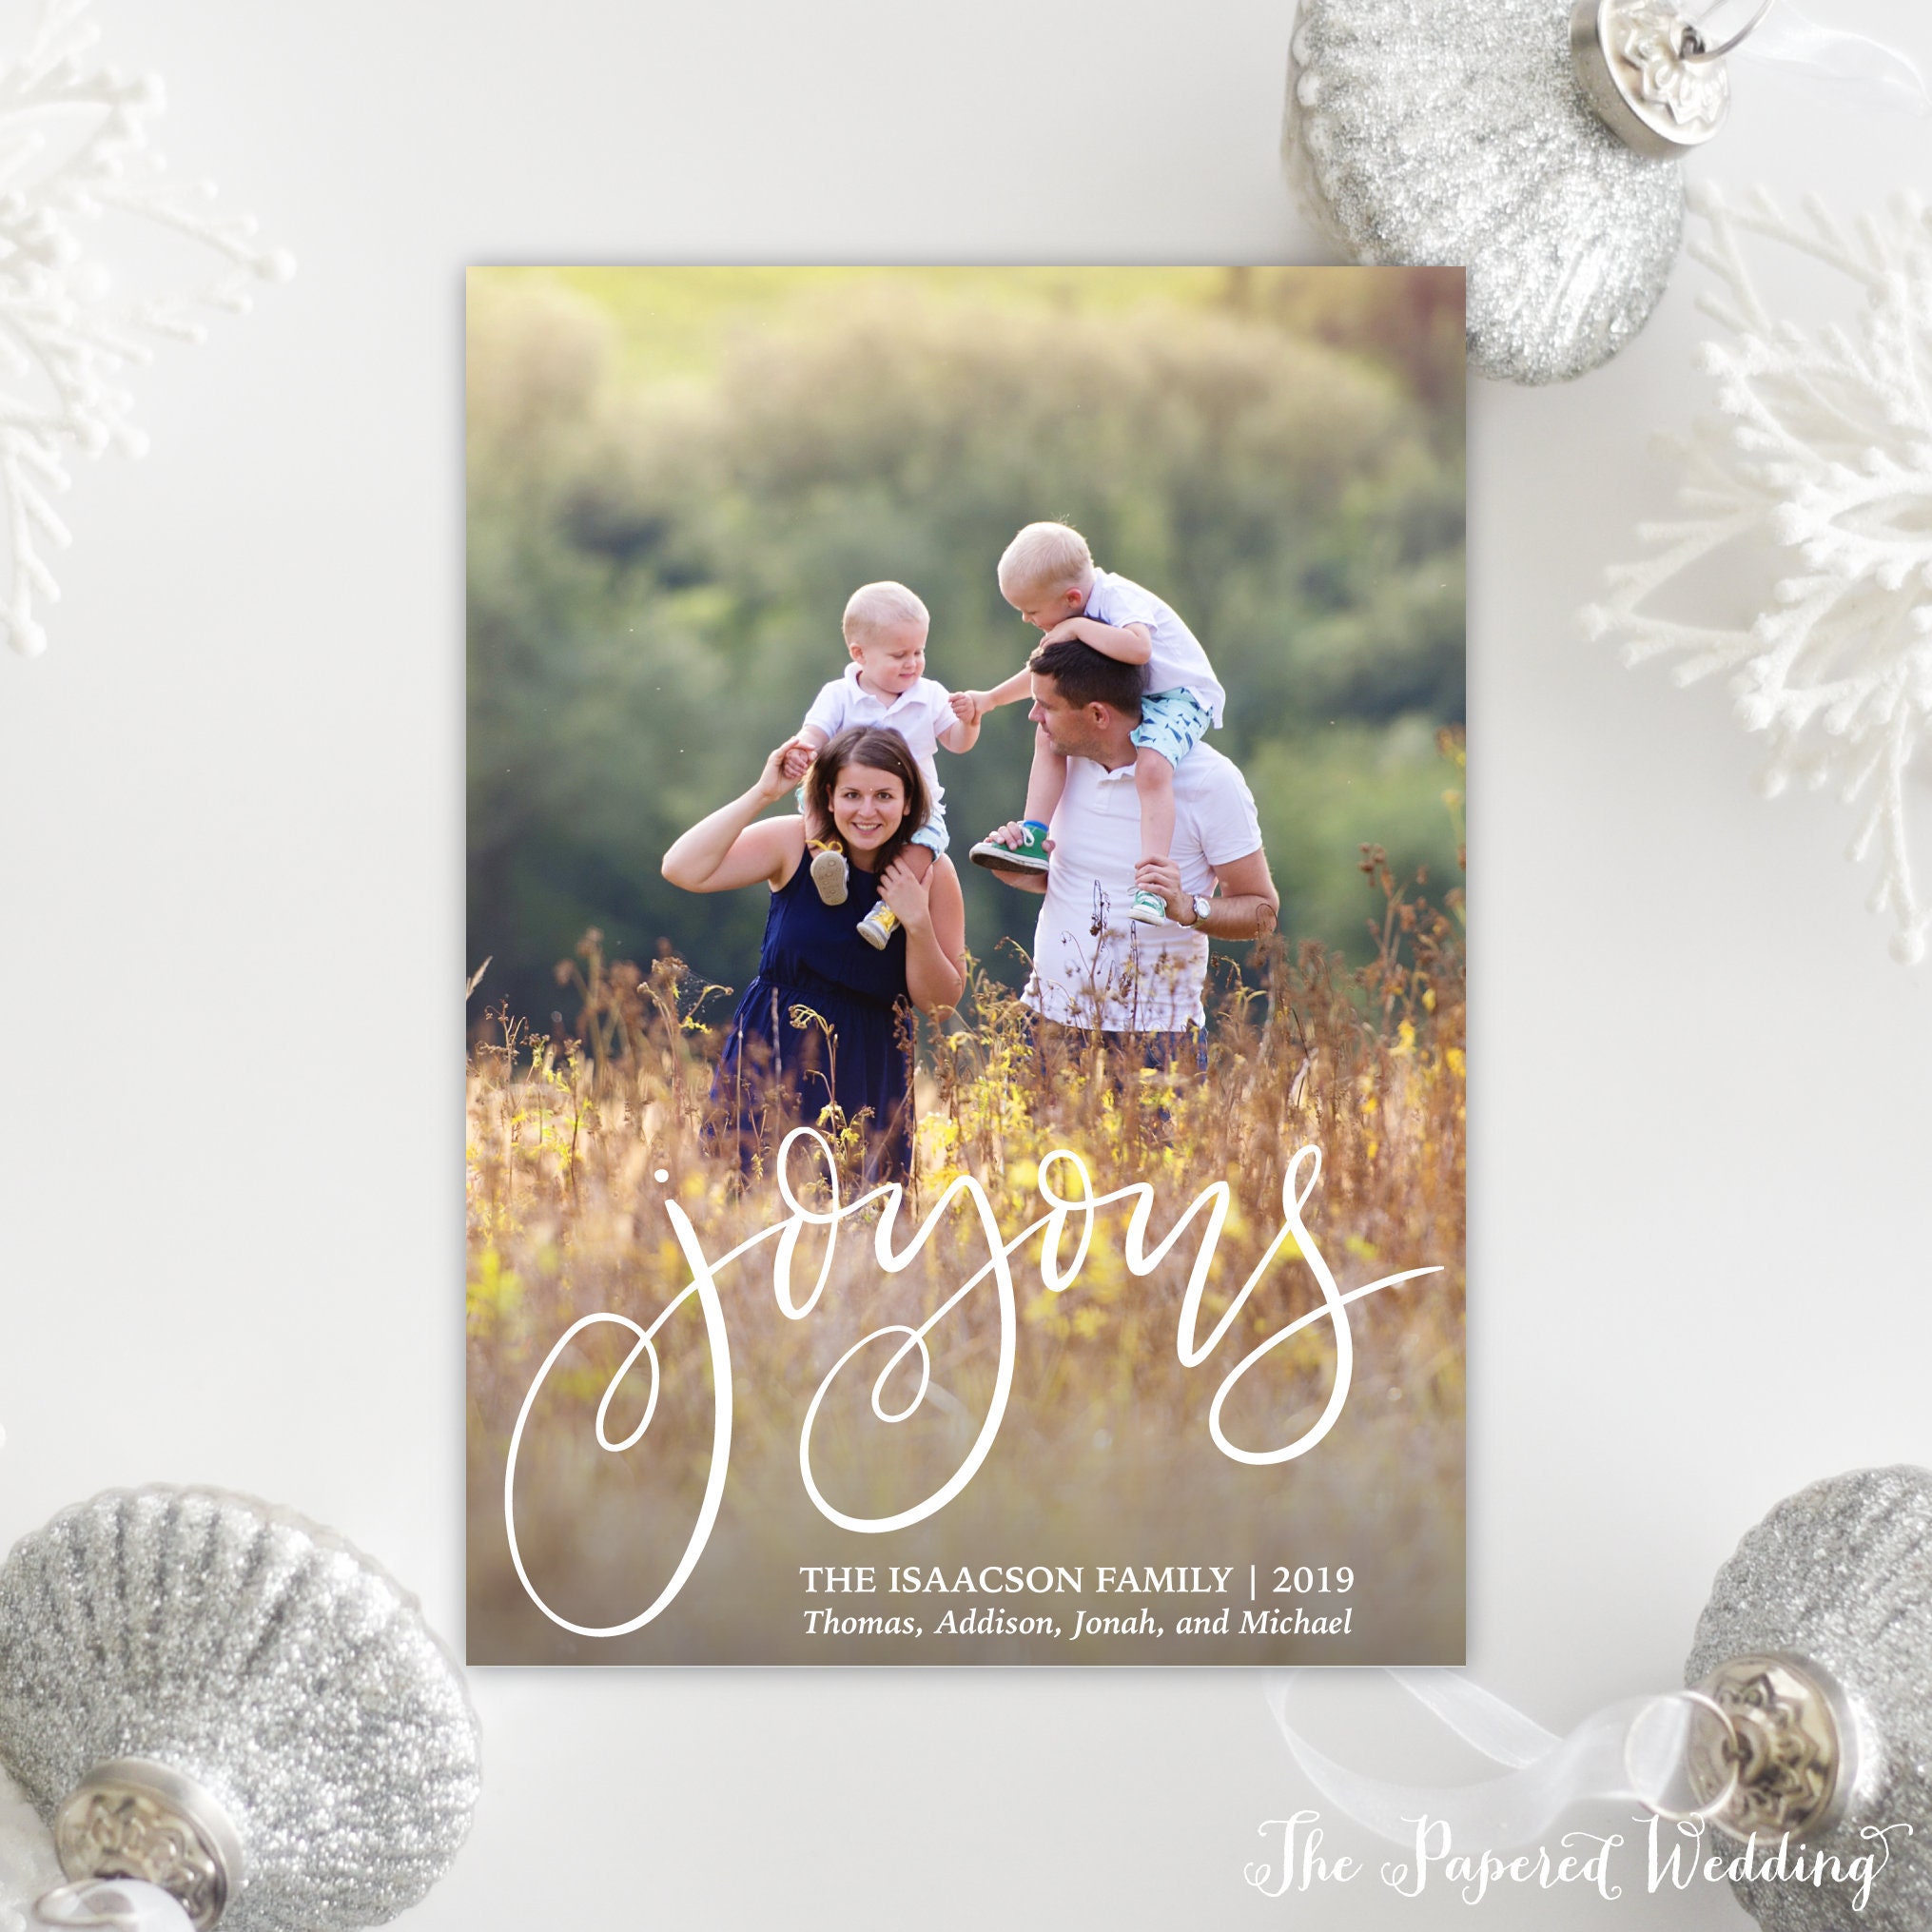 Printable Or Printed Joyous Photo Christmas Cards - Vertical Picture Holiday With Hand-Lettered "Joyous" Wording in White 104 P1"